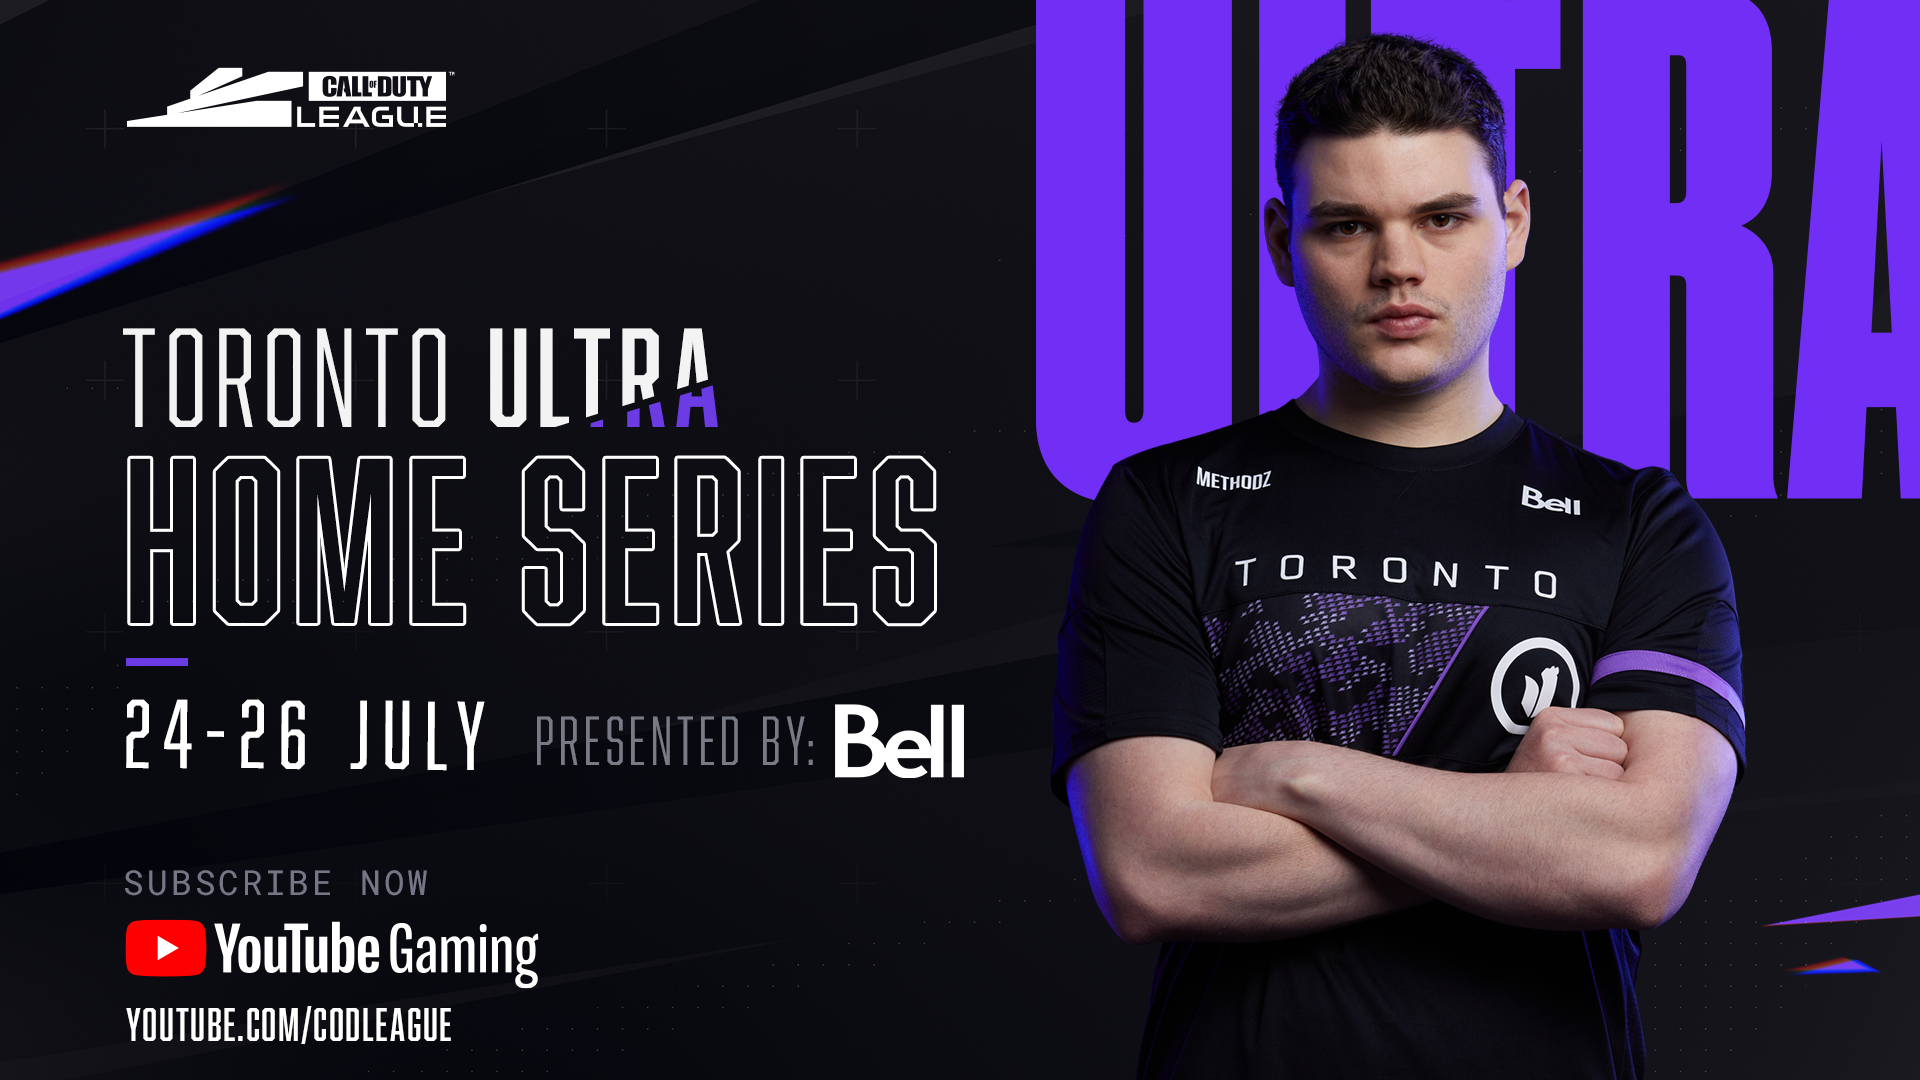 How to watch Toronto Ultra Home Series: stream, schedule & more